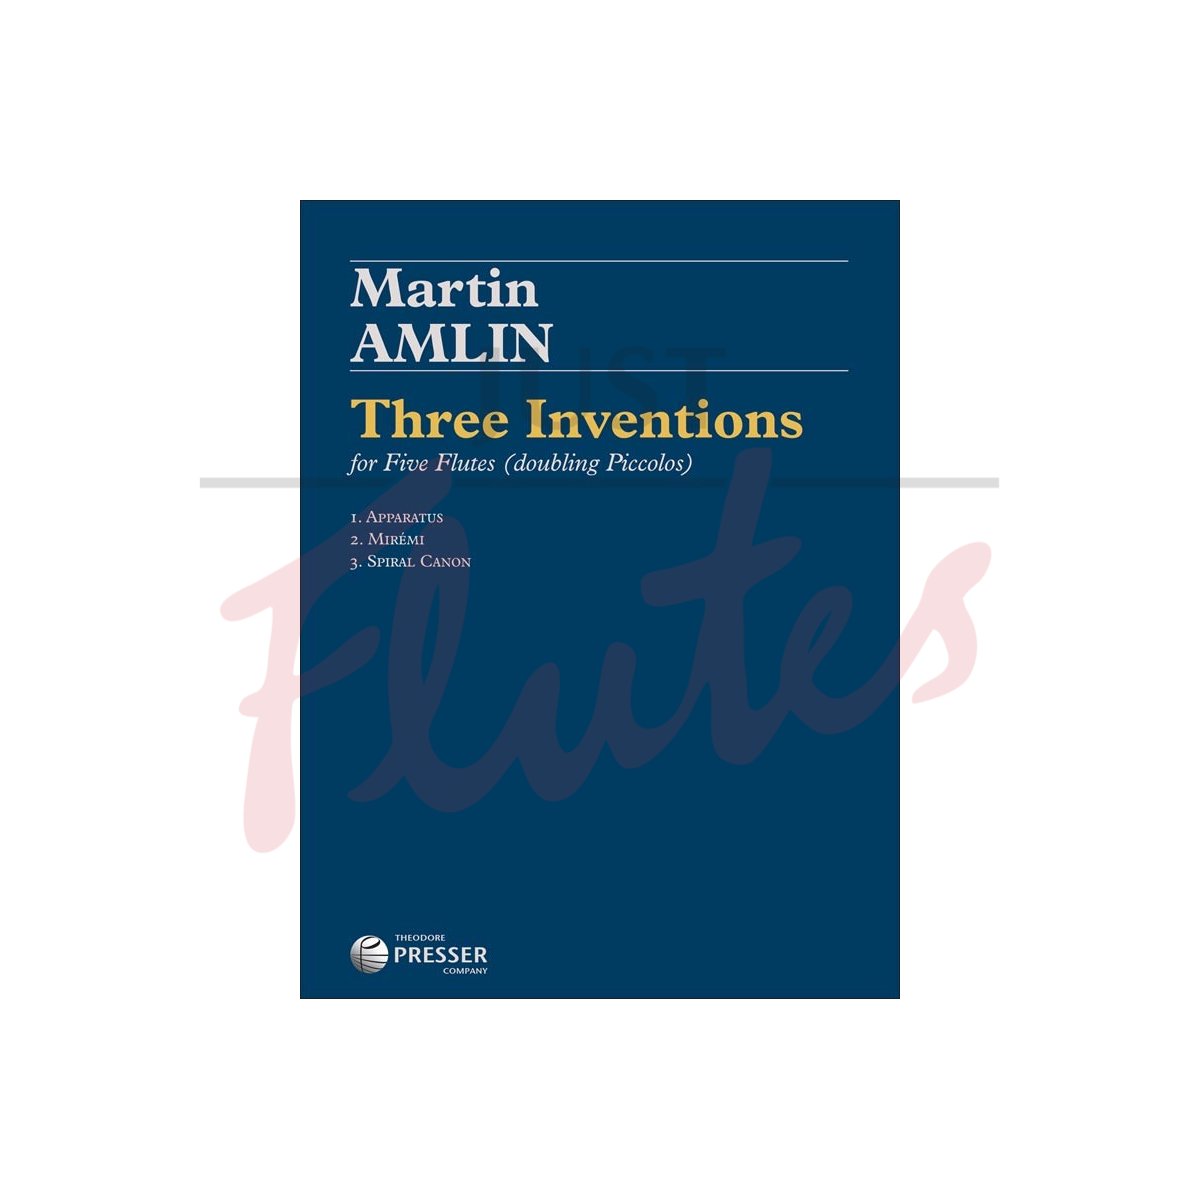 Three Inventions for Five Flutes (Doubling Piccolos)